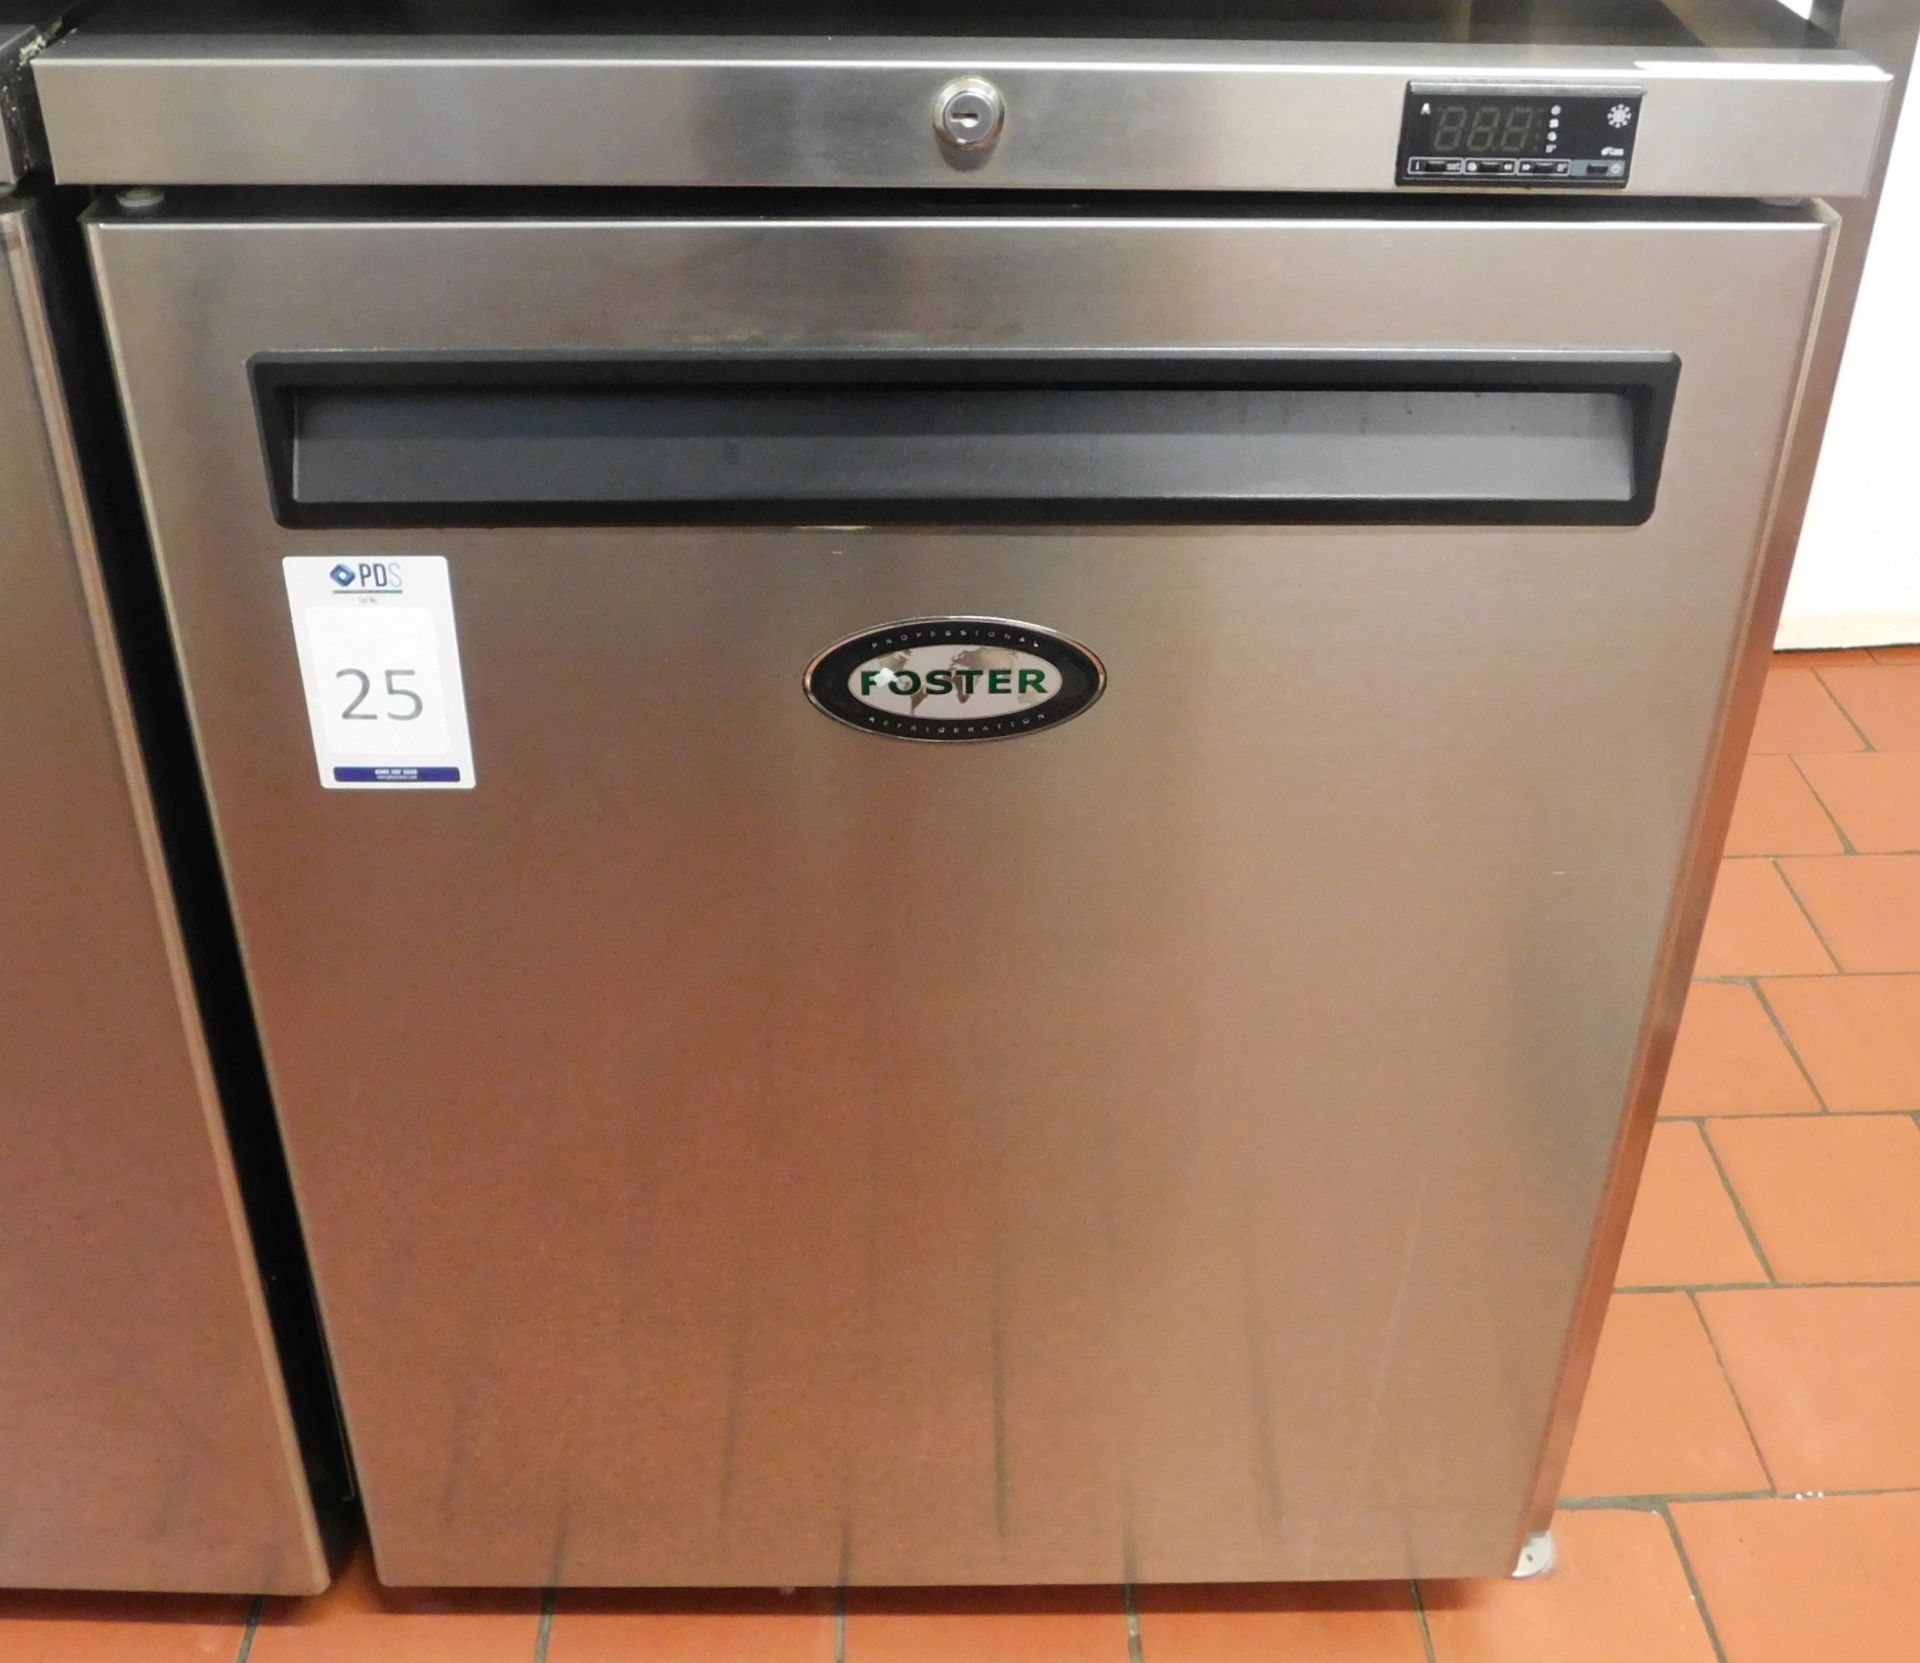 Foster HR150-A Stainless Steel Undercounter Refrigerator, Serial Number E5312427 (Location